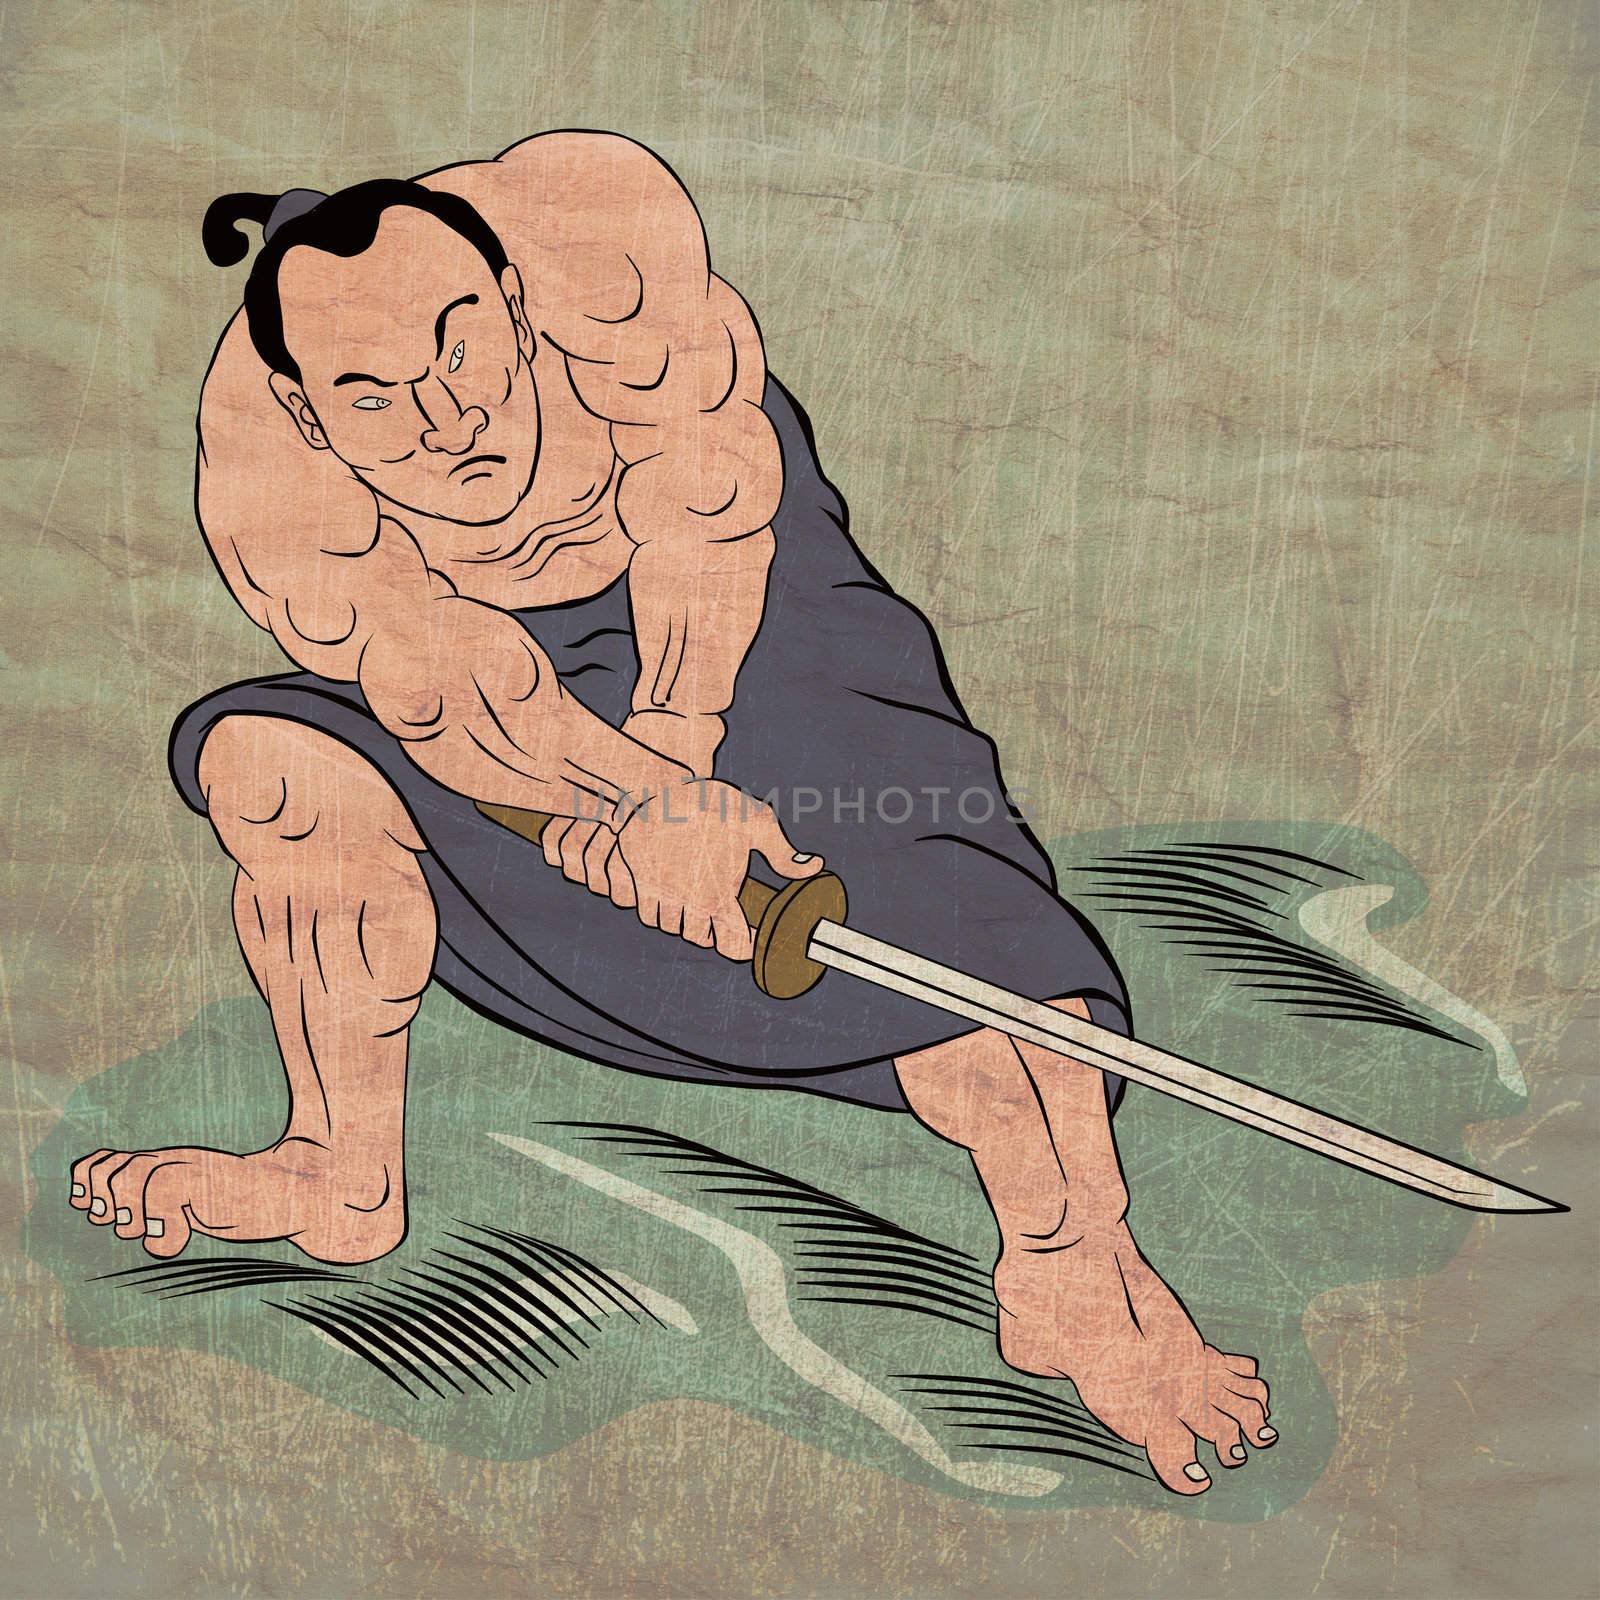  illustration of a Samurai warrior with katana sword in fighting stance done in cartoon style Japanese wood block print